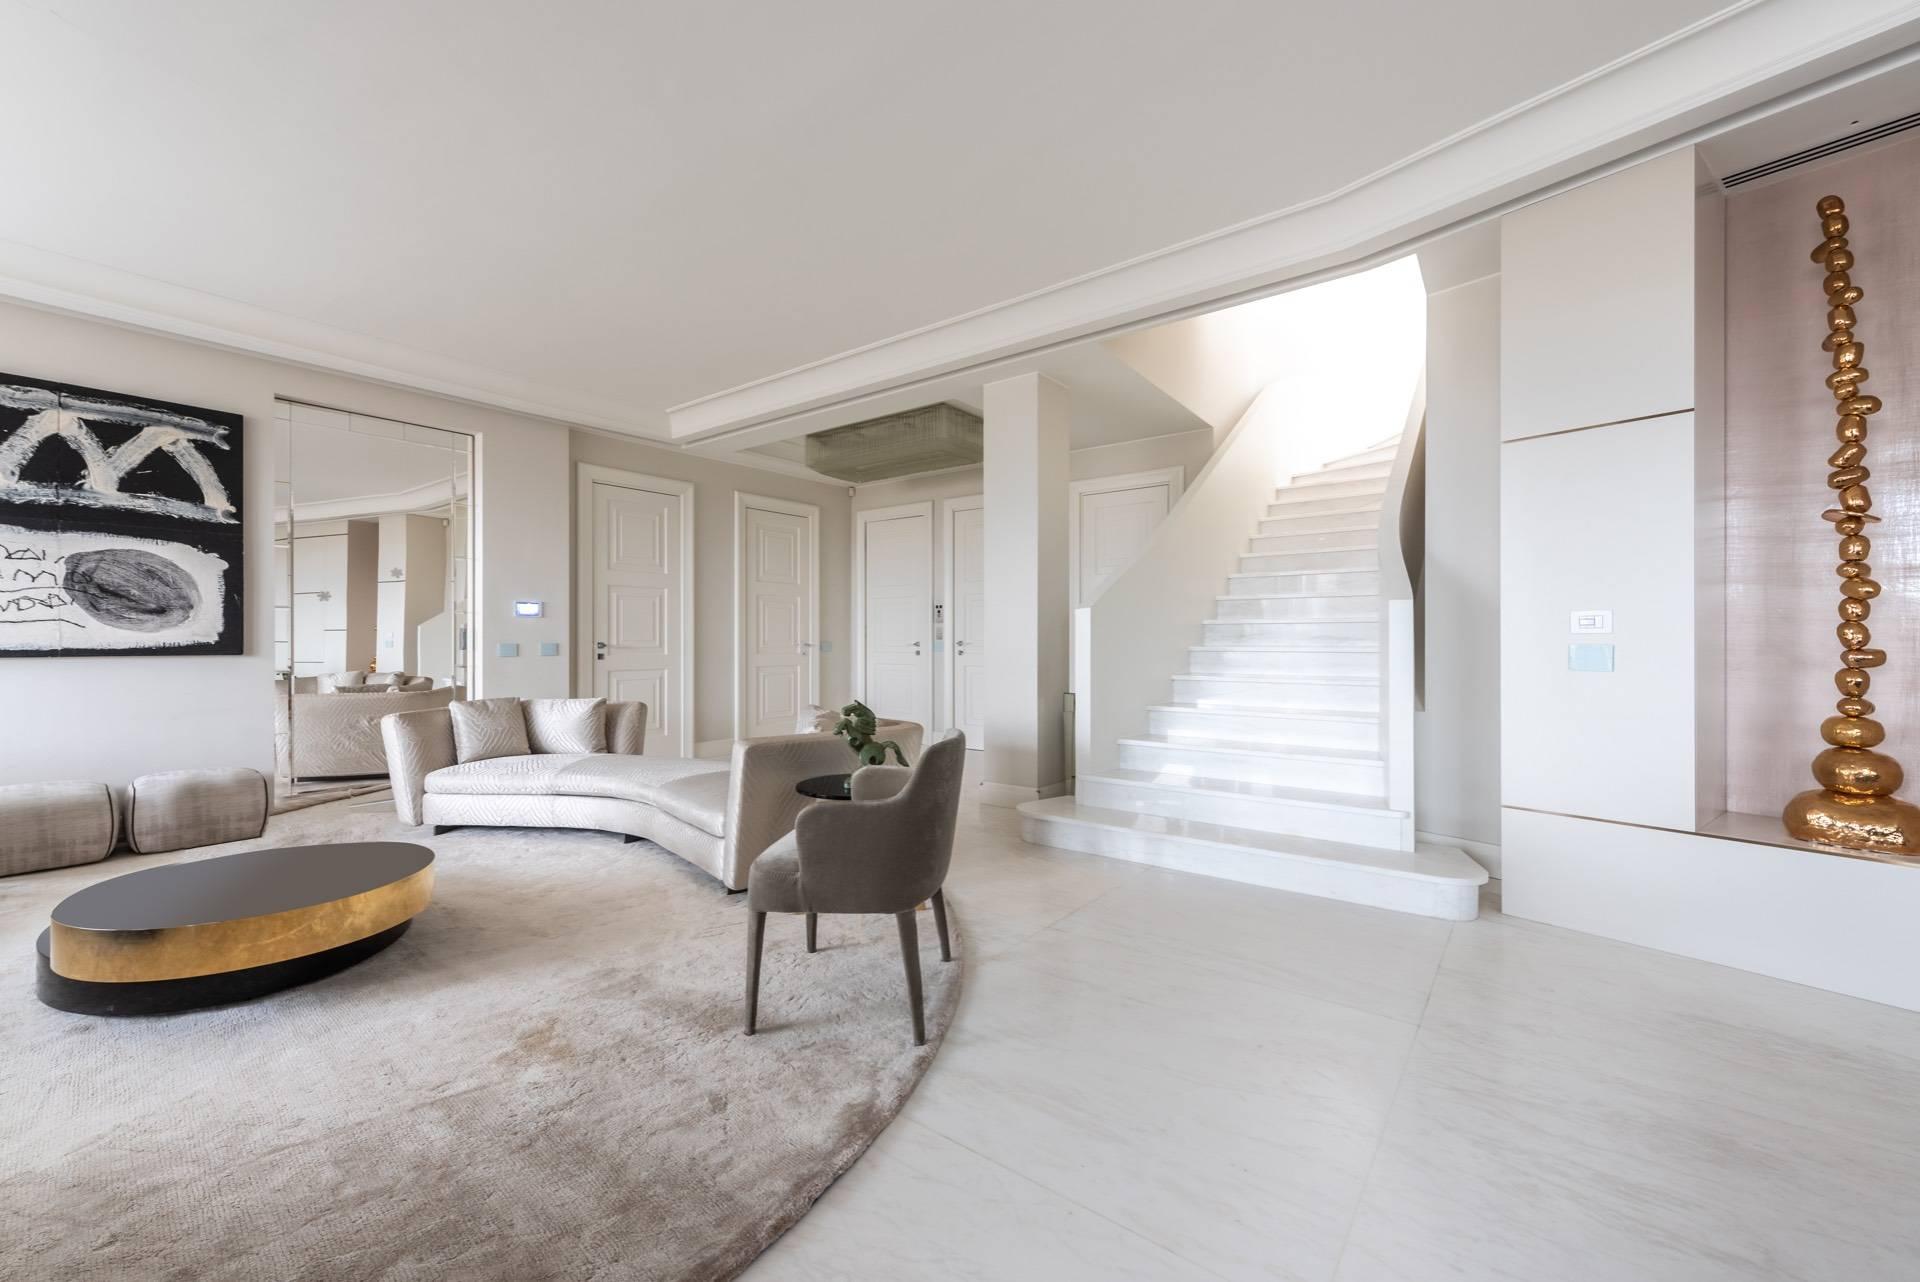 Incomparable penthouse with 400 sqm terrace - 14